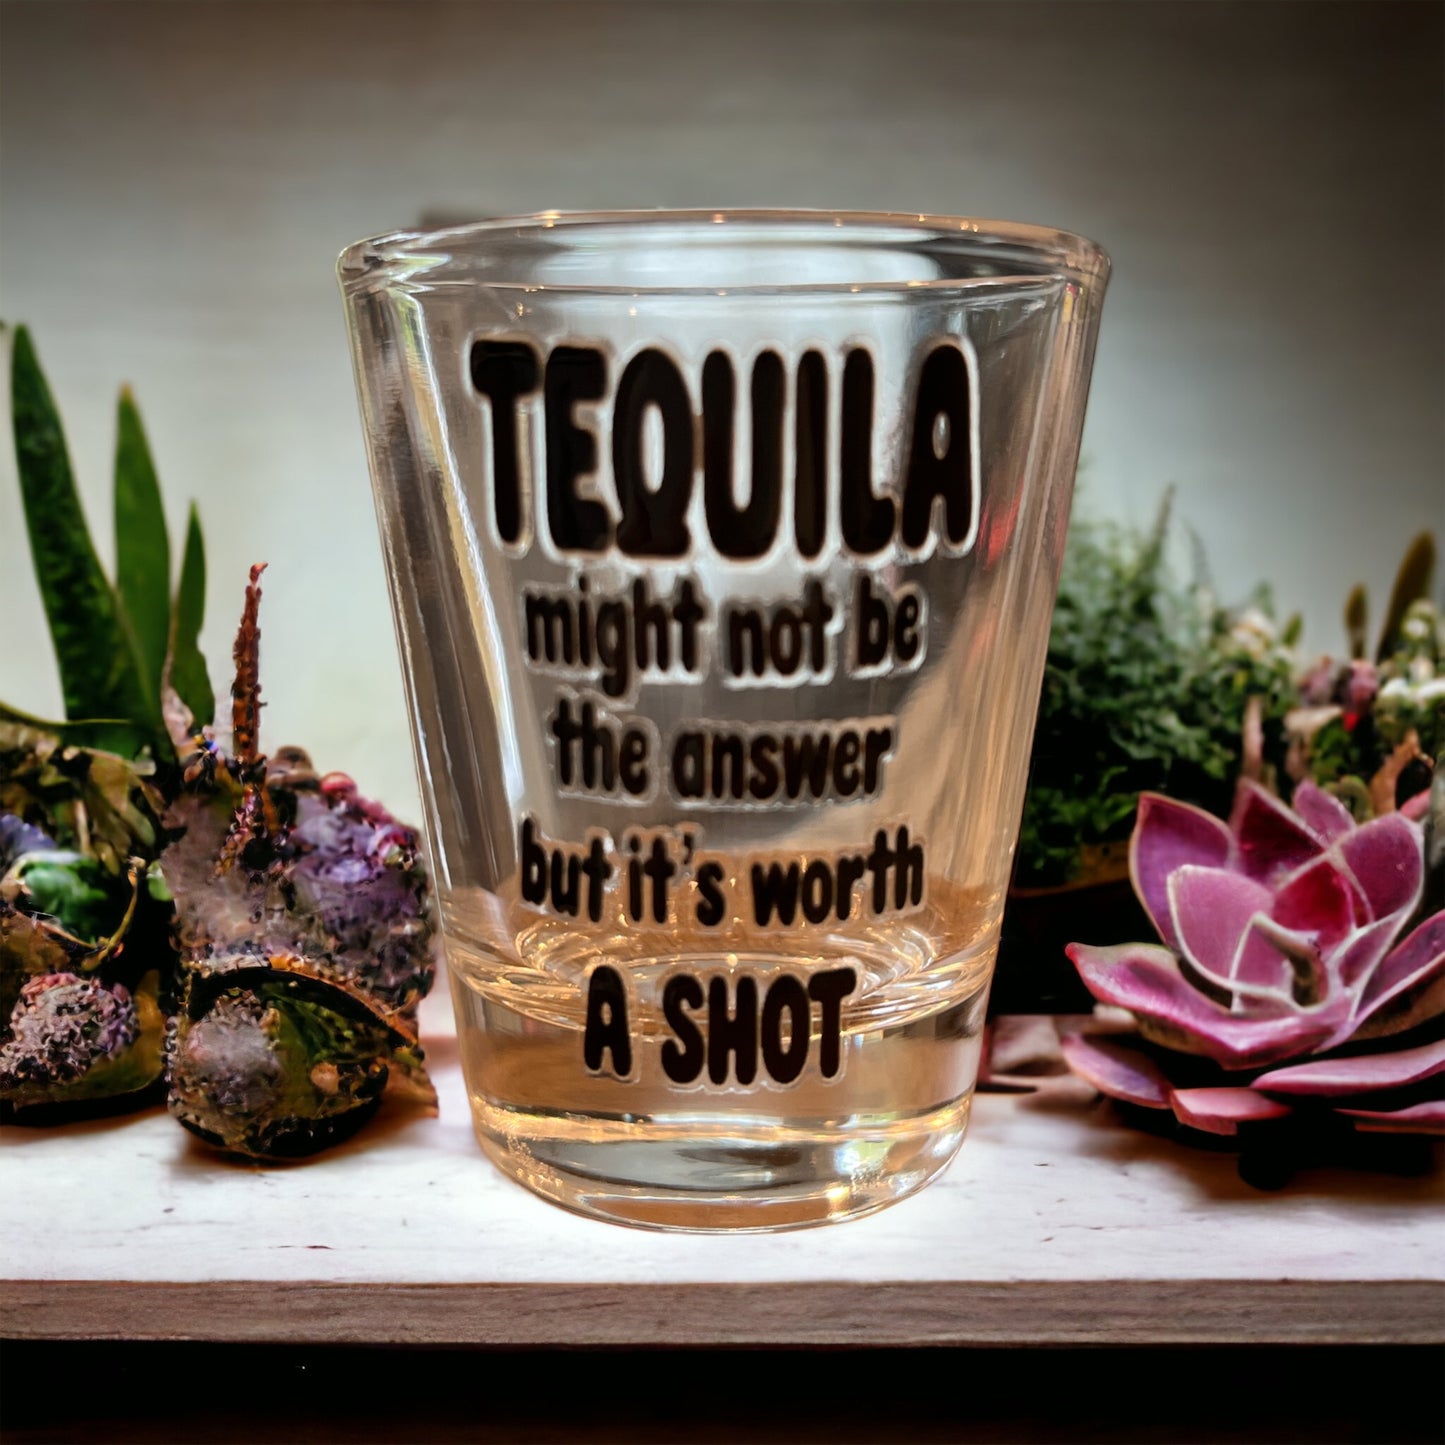 Tequila might not be the Answer Shot glass